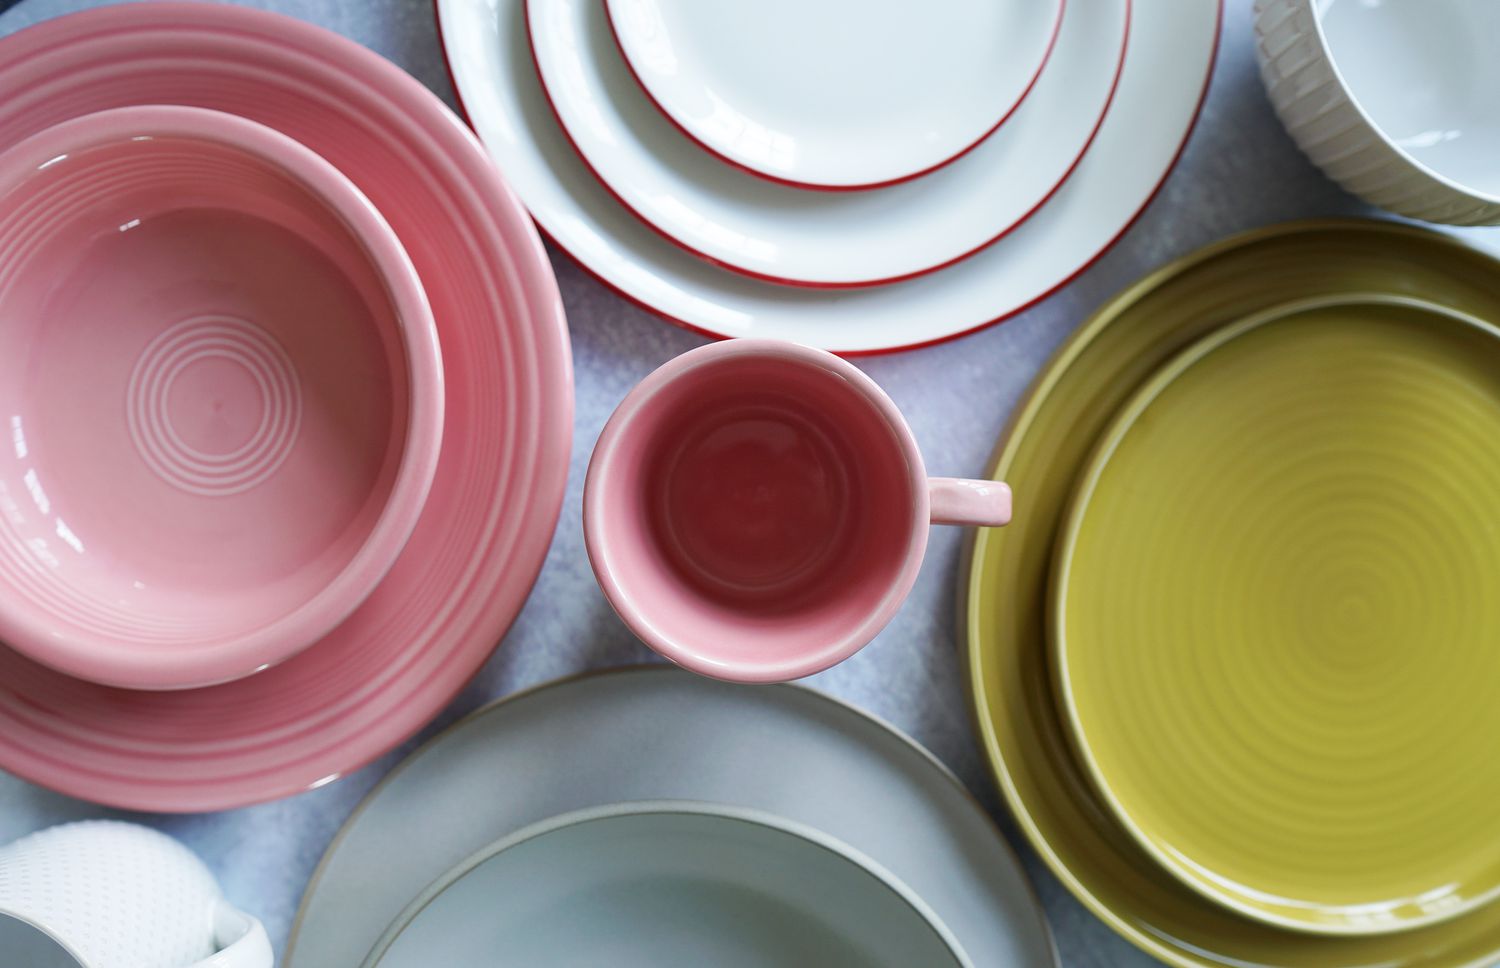 A more closeup look at some dinnerware sets